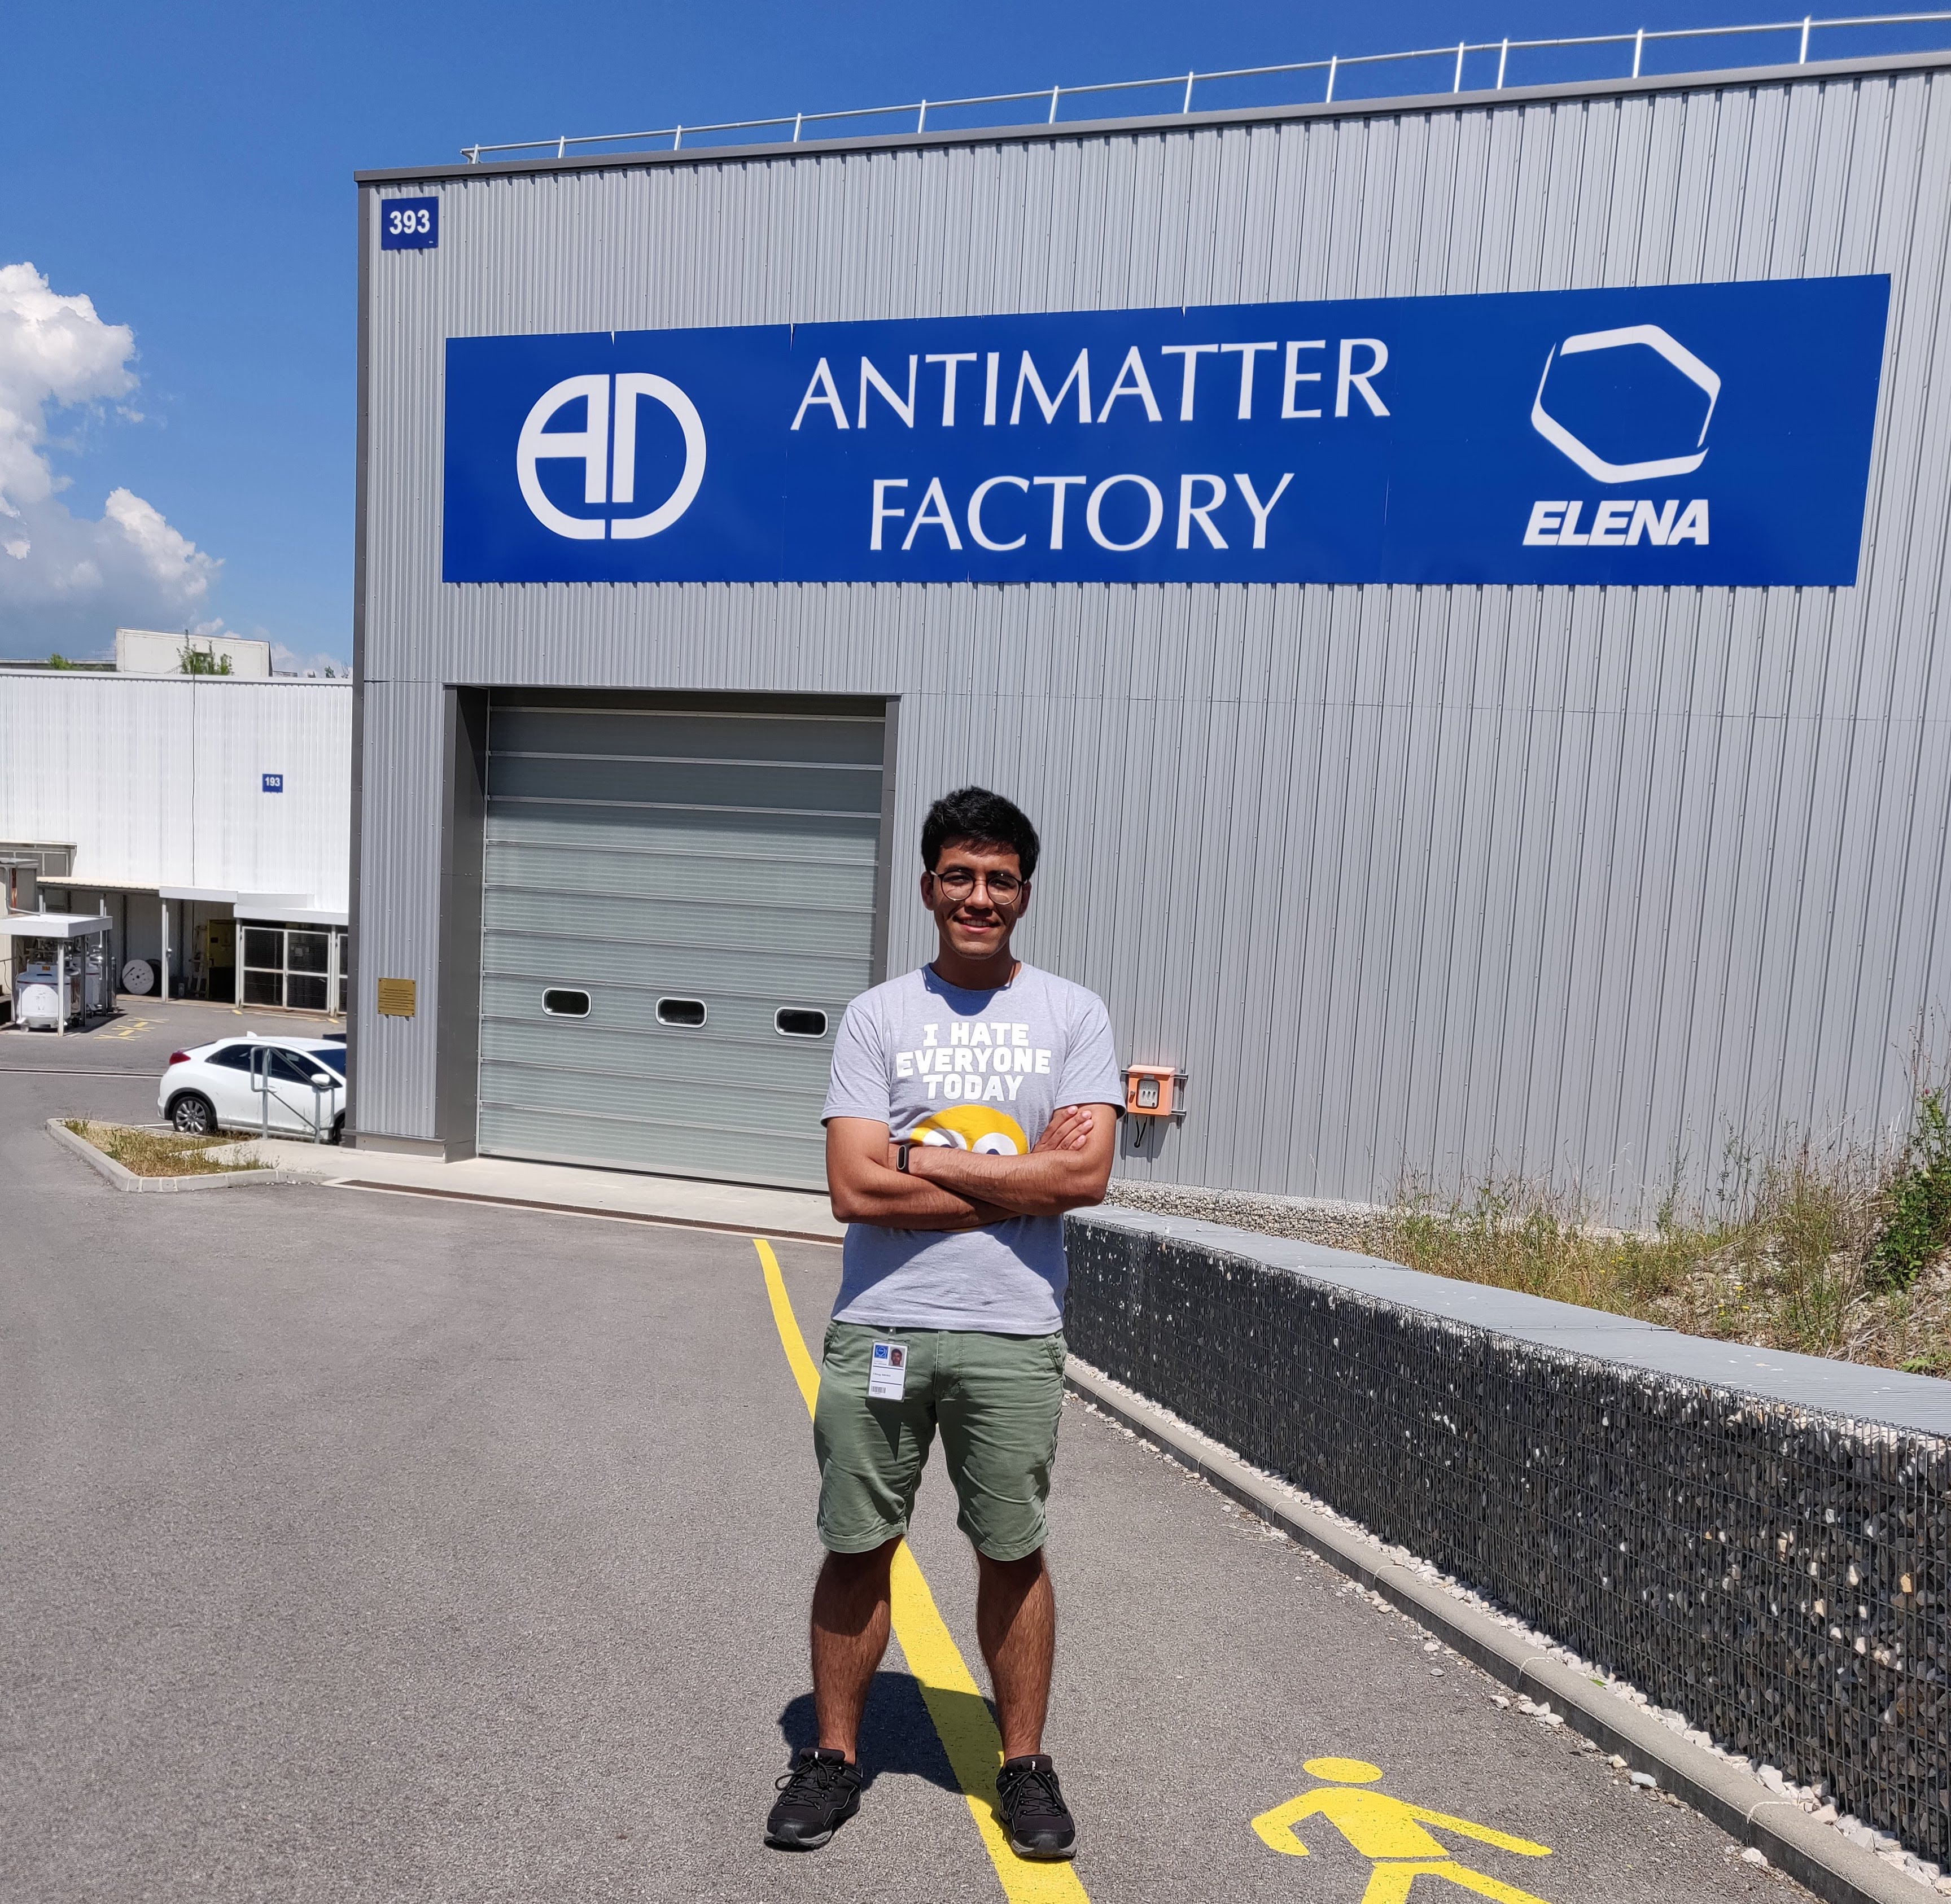 Visiting the Antimatter Factory